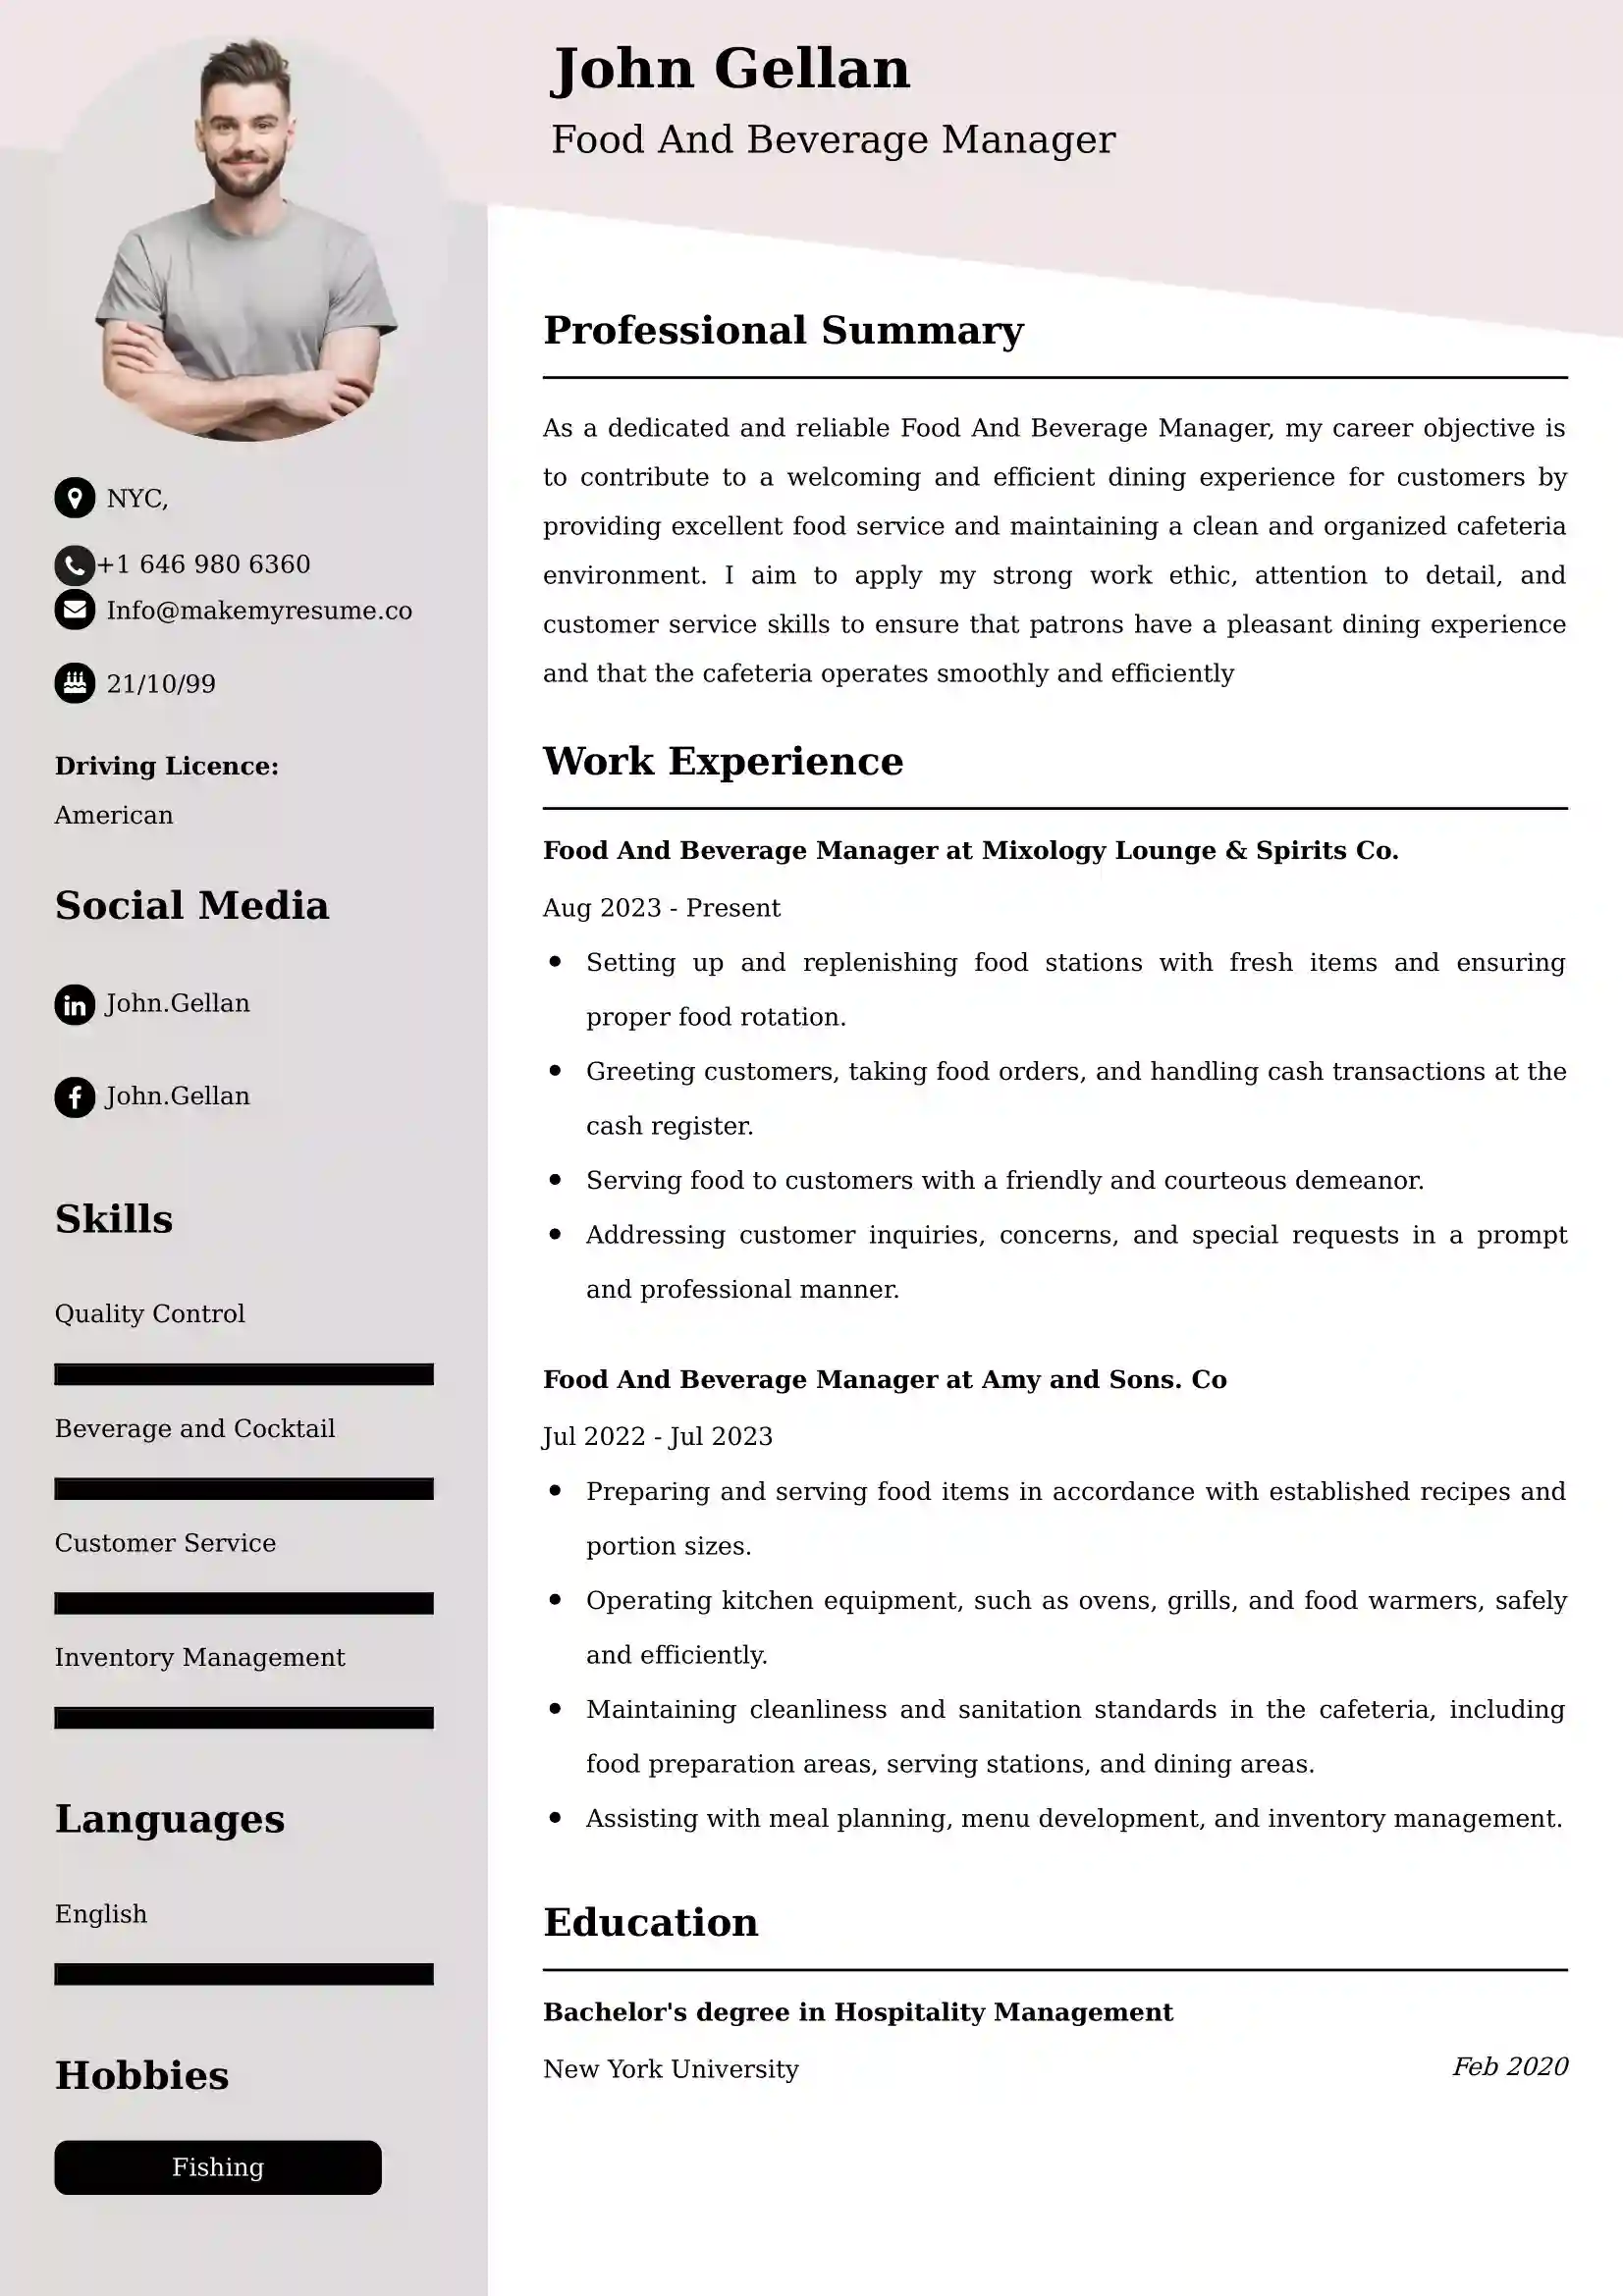 Food And Beverage Manager CV Examples - US Format